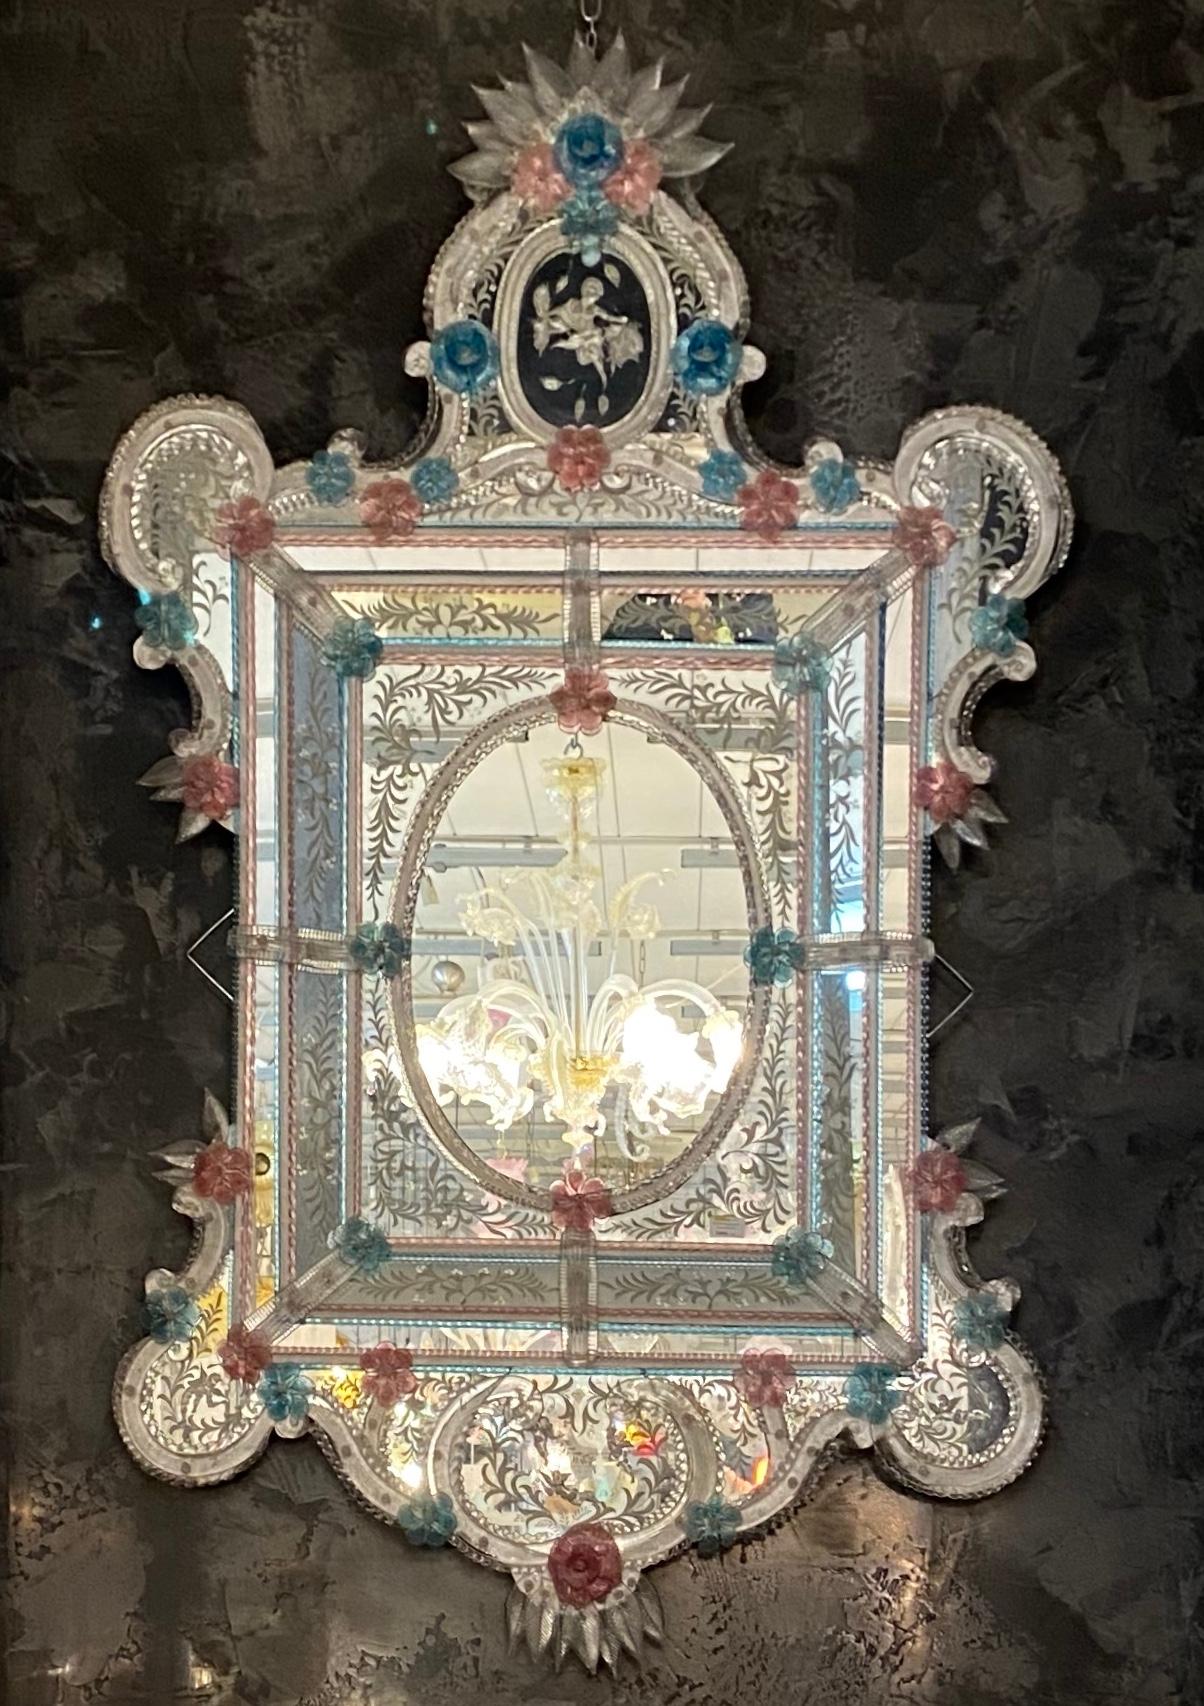 This beautiful Venetian mirror features etched floral motifs adorning the mirrored frame. Along the edges of the frame are glass rope accents and numerous glass pink and blu flowers.
Executed by the great a Master of Murano.
Available also a pair.